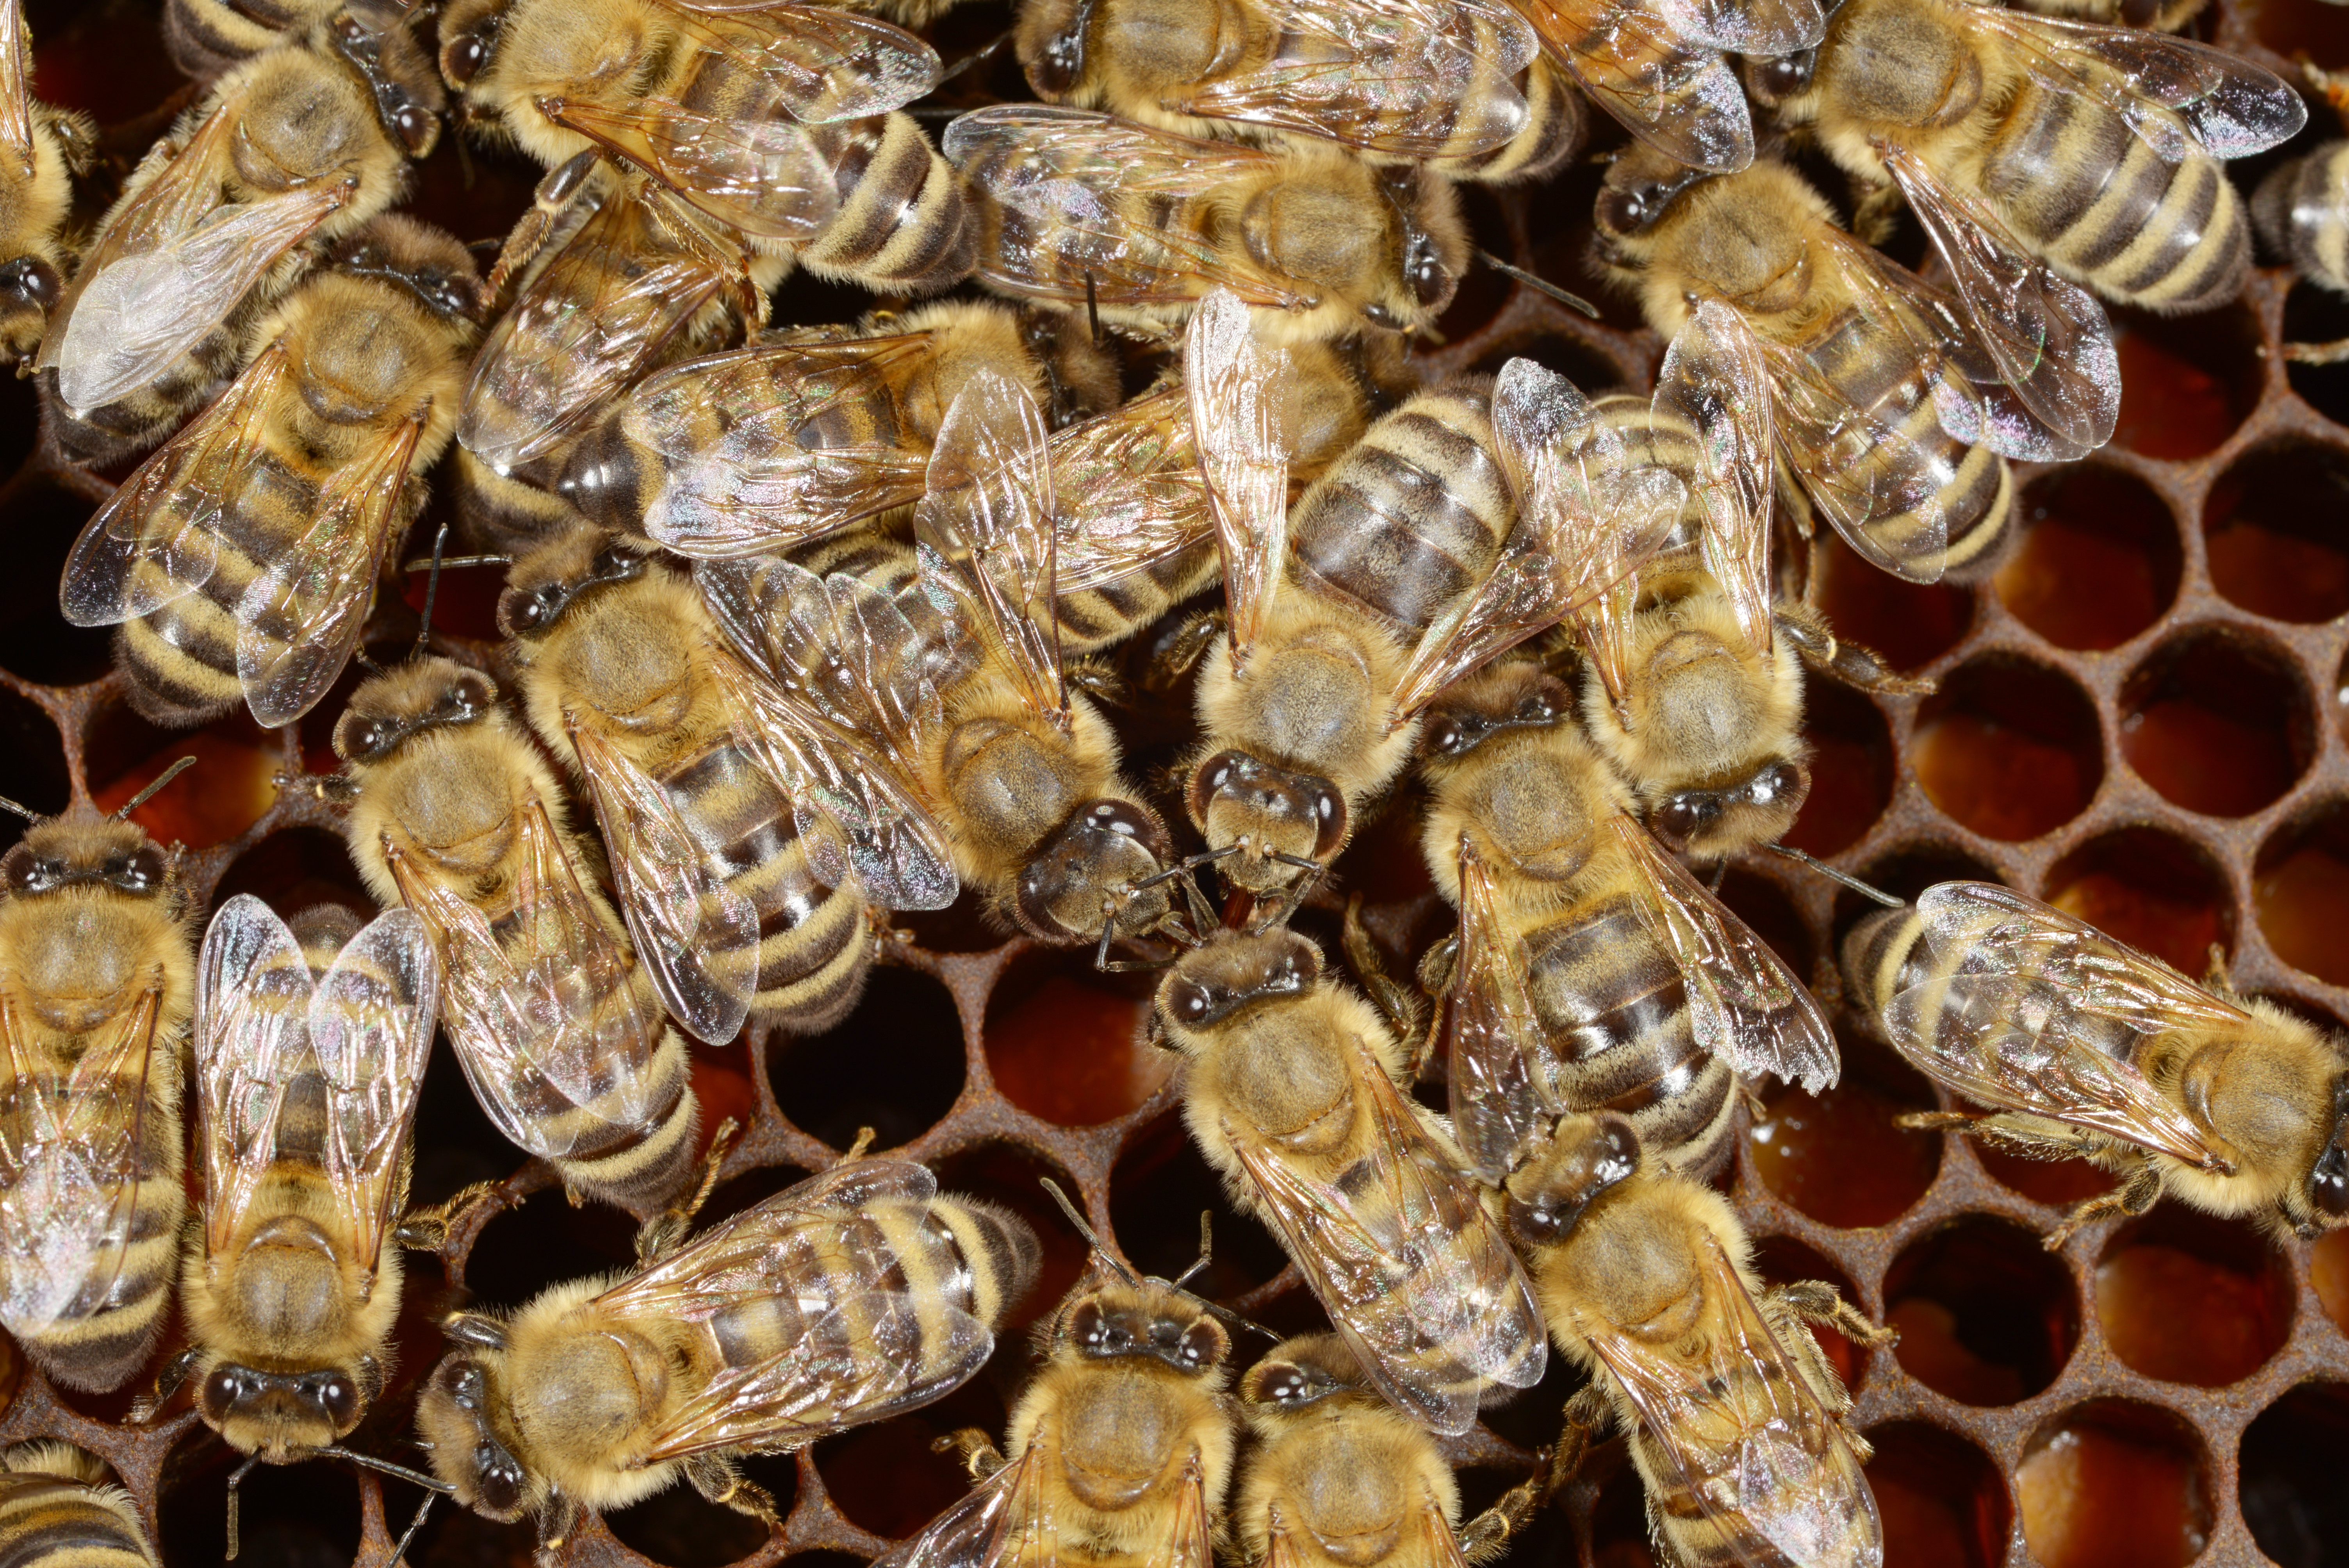 Social insects, such as honey bees, can quickly spread harmful organisms through the colony.